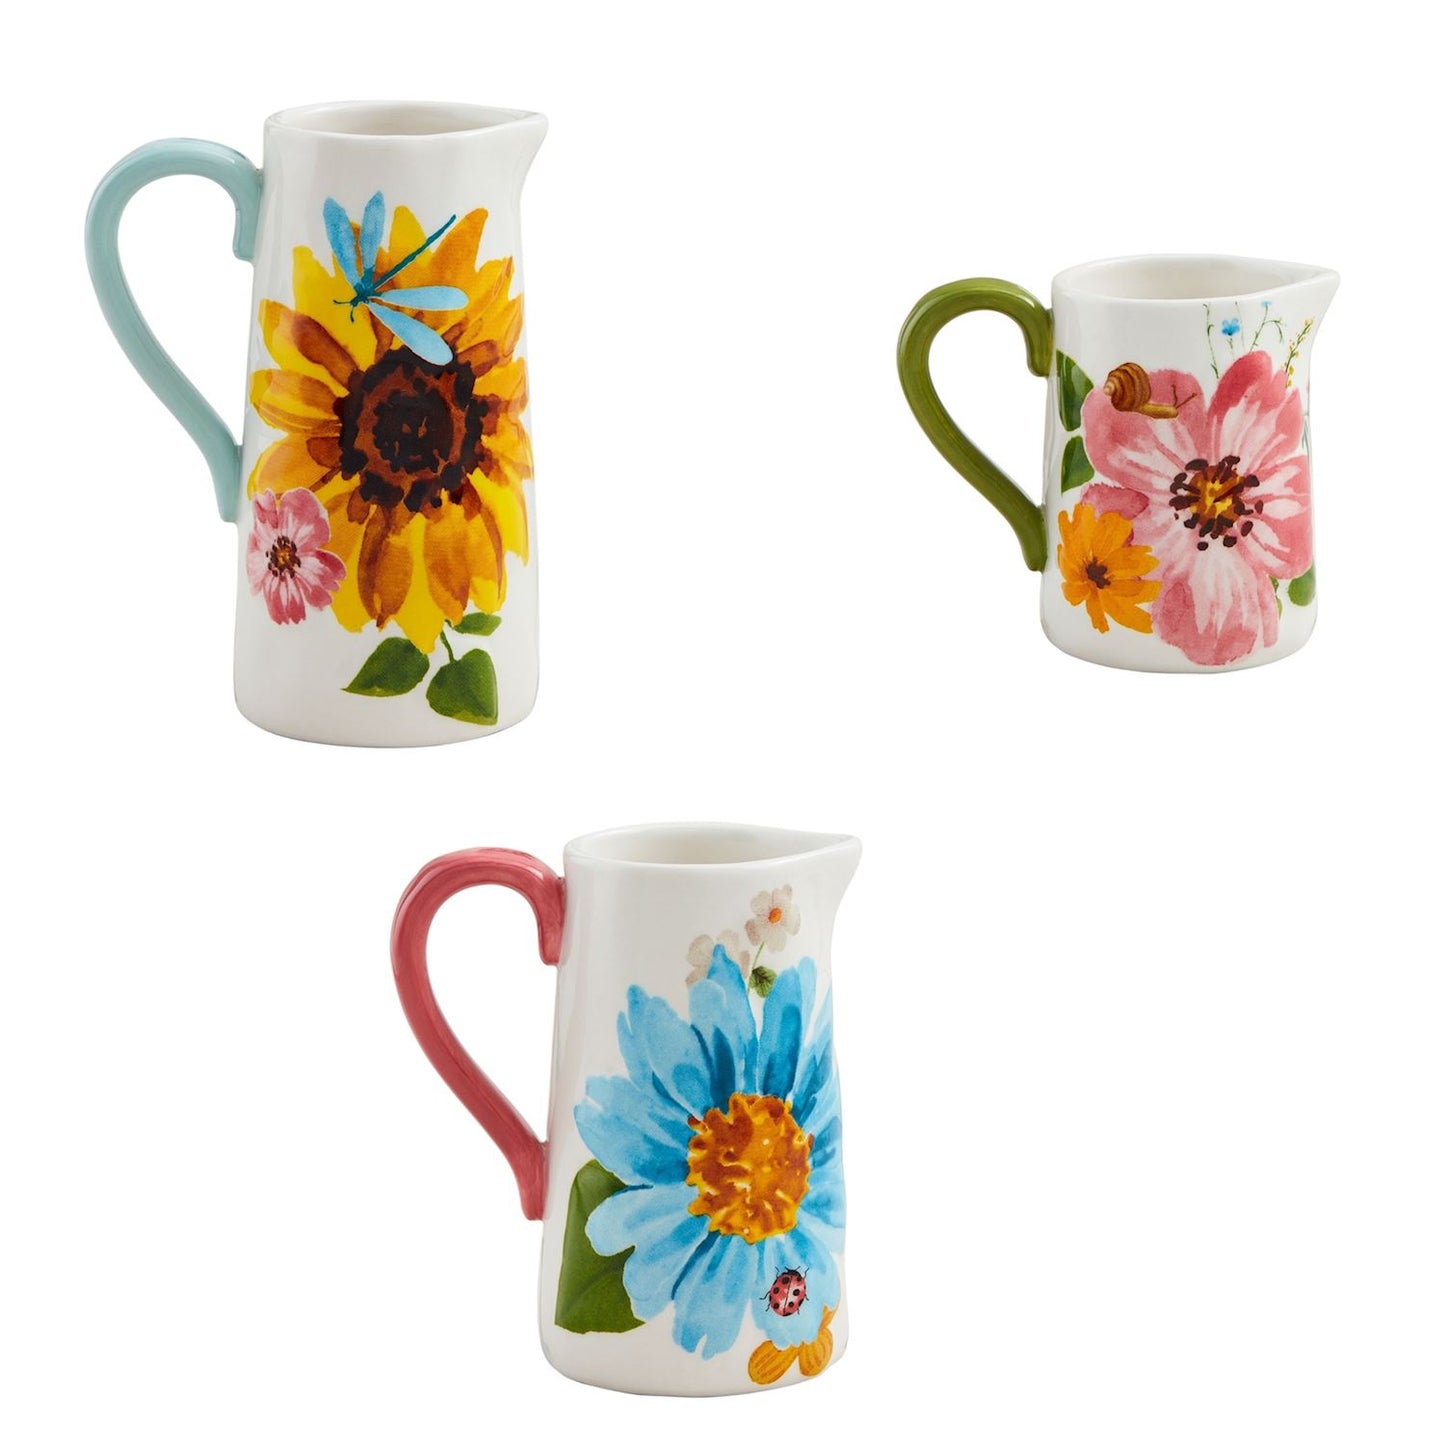 3 styles of floral and bug pitcher vases on a white background.